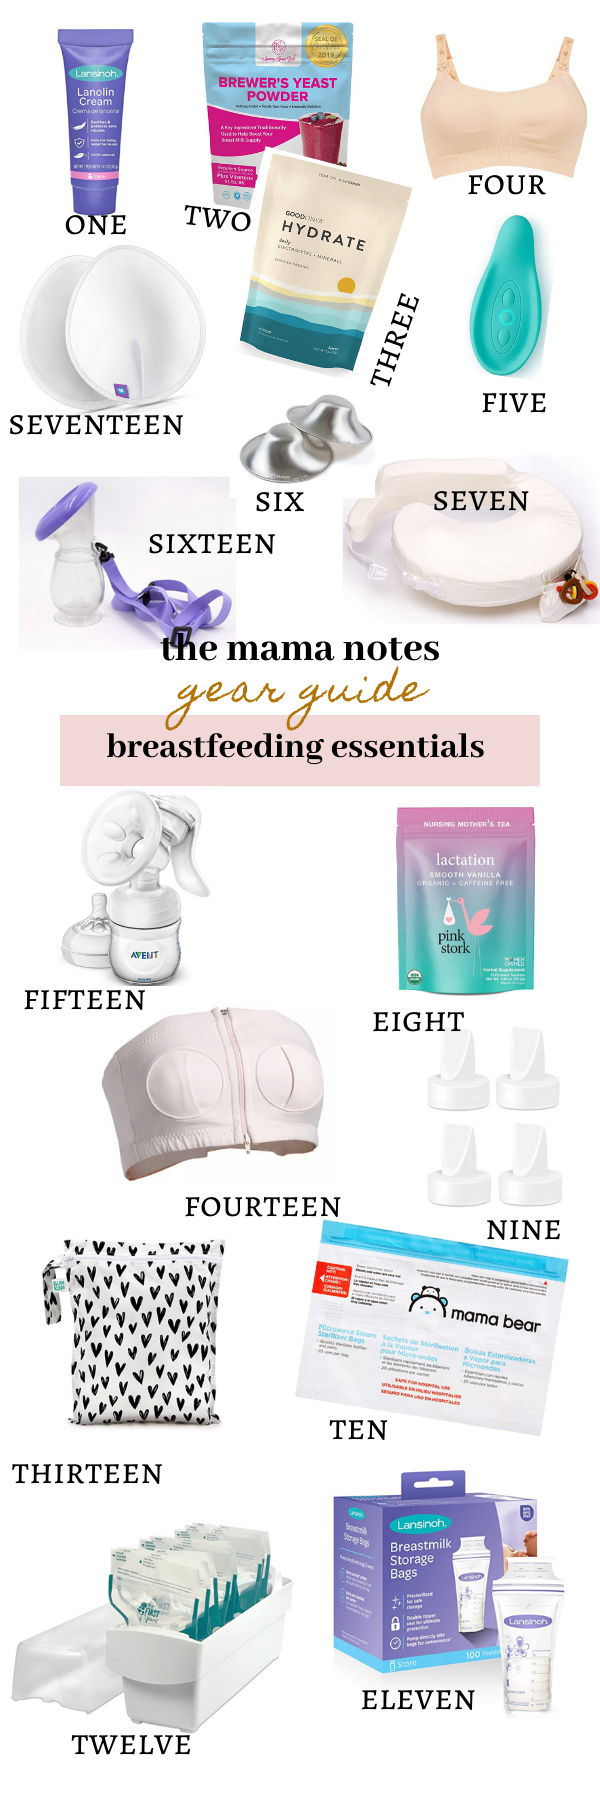 https://themamanotes.com/wp-content/uploads/2020/05/everything-you-need-for-breastfeeding.png